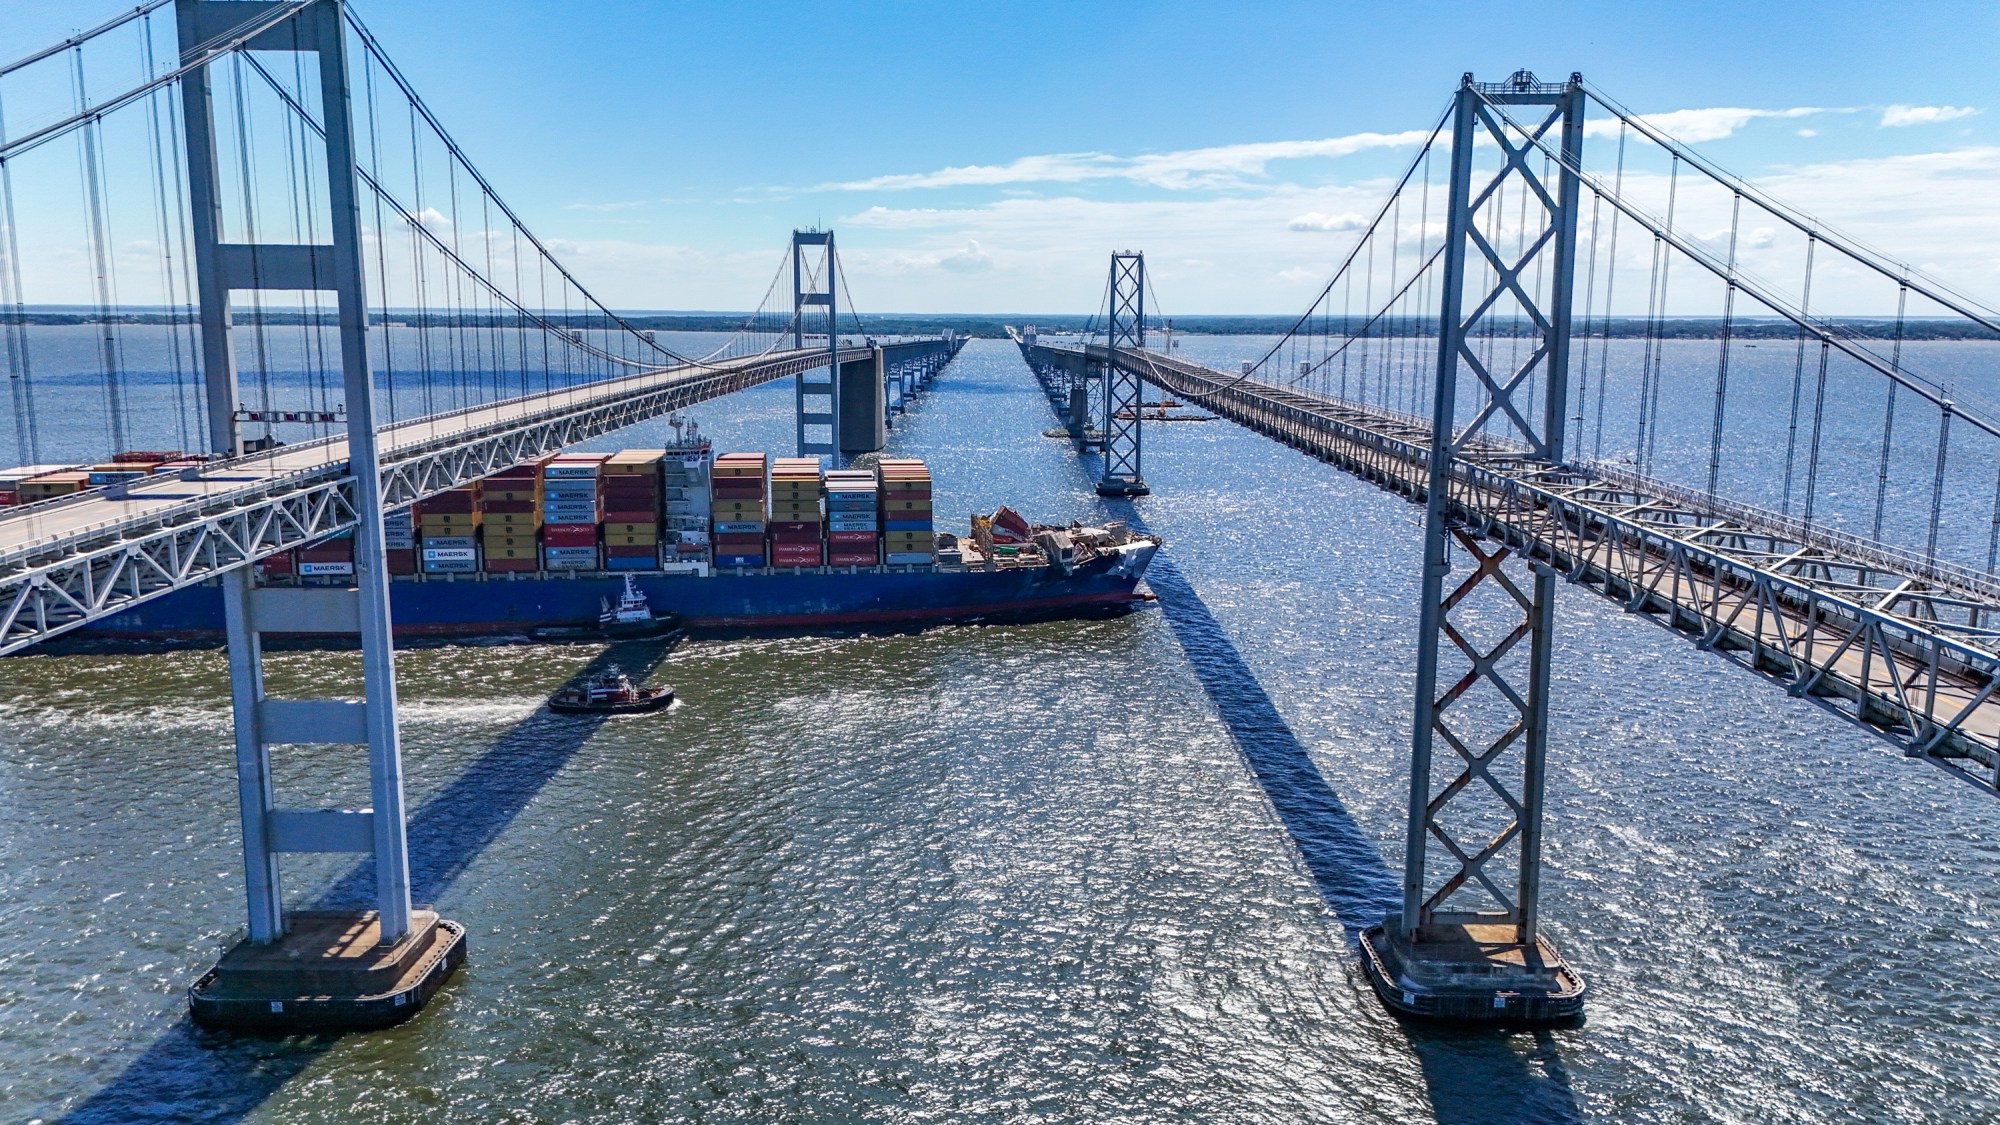 The container ship Dali passes below an empty Chesapeake Bay Bridge on its way to Norfolk. Traffic was stopped briefly for the Dali's passage as a precaution. Ninety days ago the ship hit a support pier of the bridge causing a catastrophic collapse.